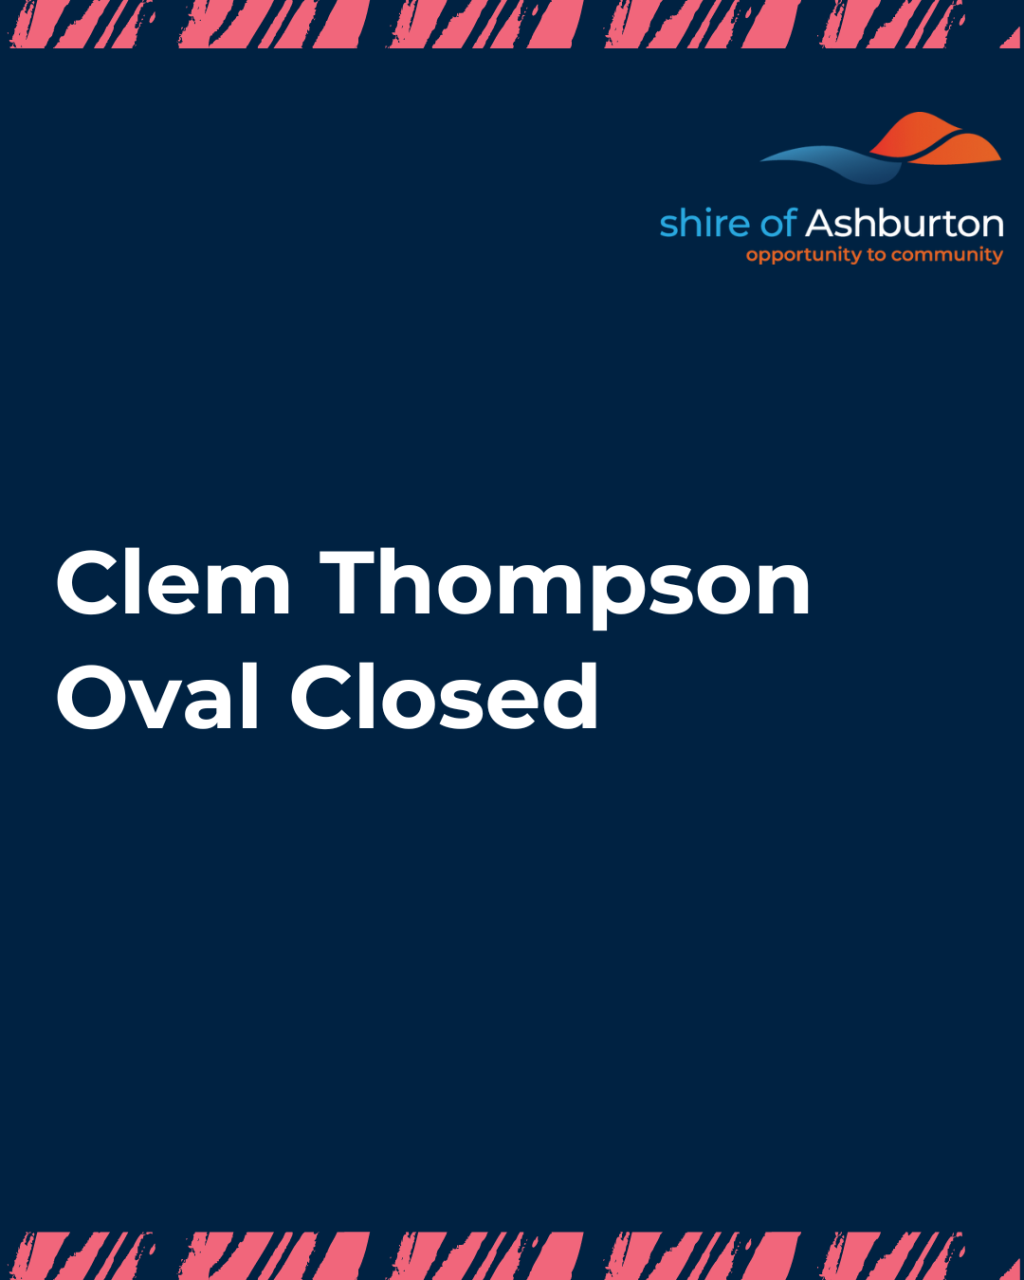 Clem Thompson Oval Closed